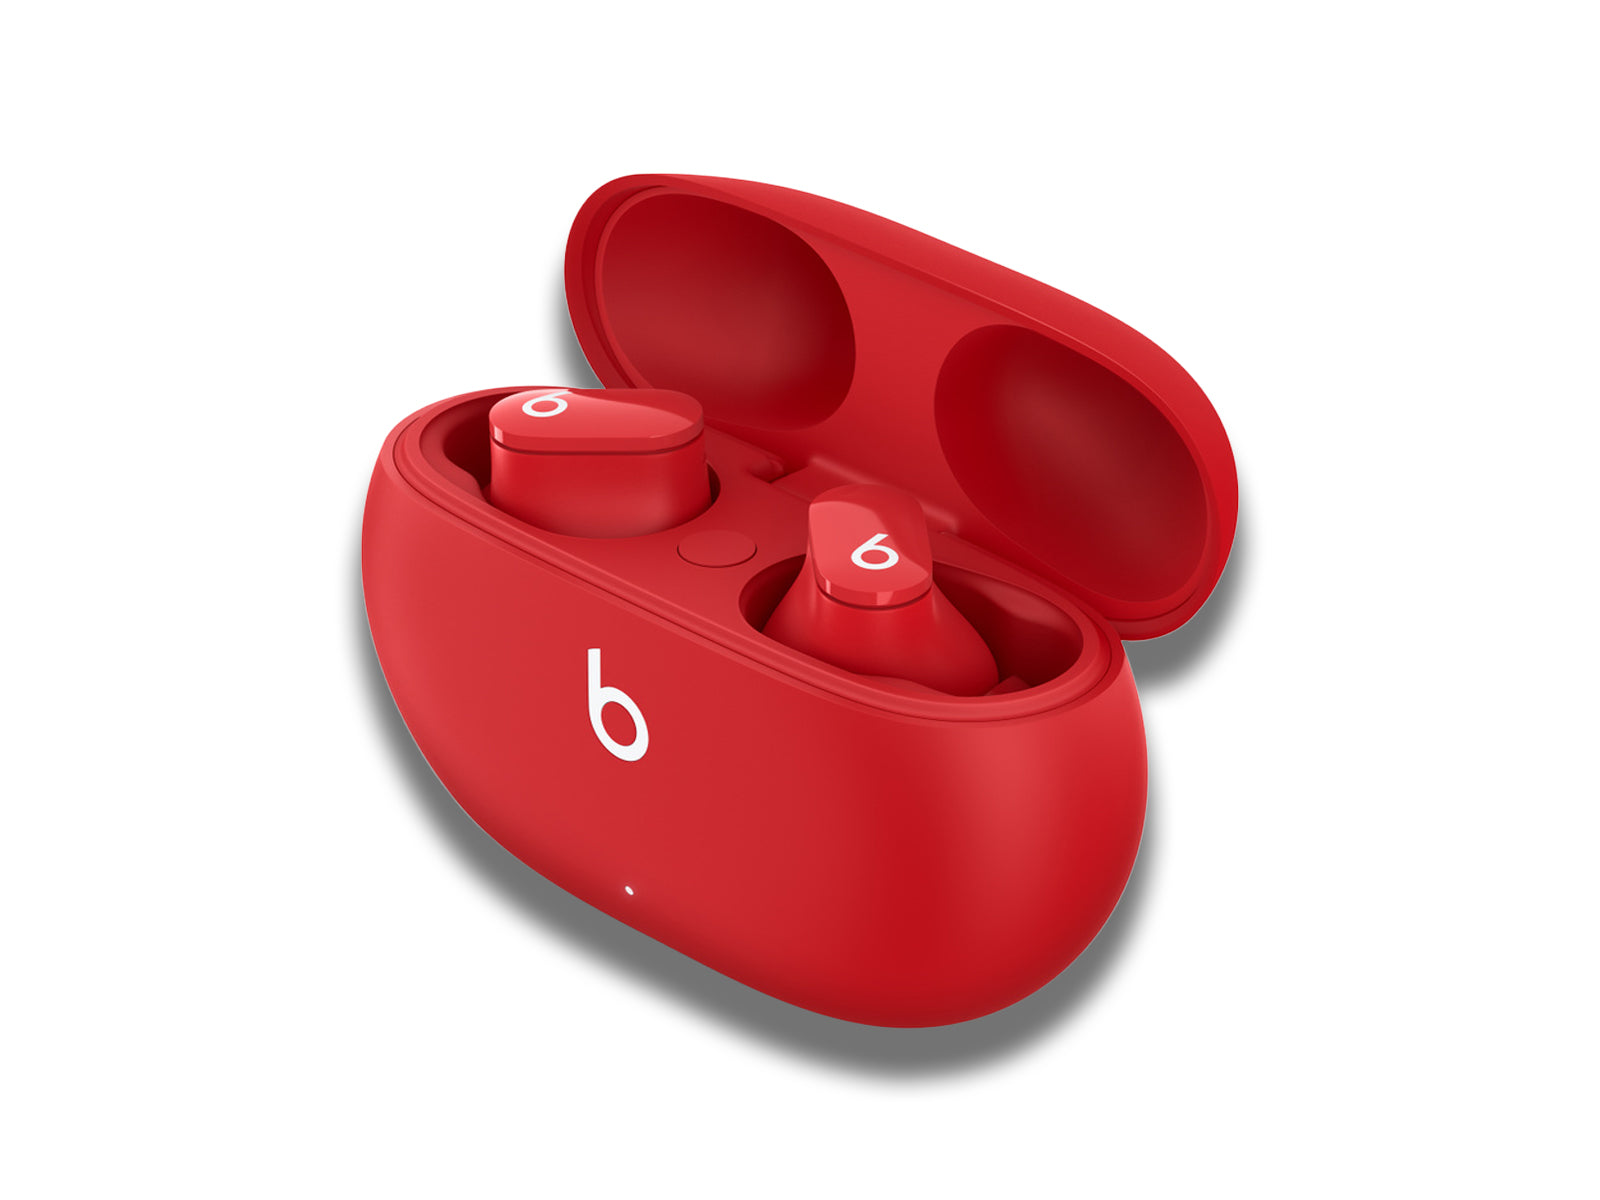 Left-side-view-image-of-the-red-charging-case-with-earphones-inside-on-the-white-background